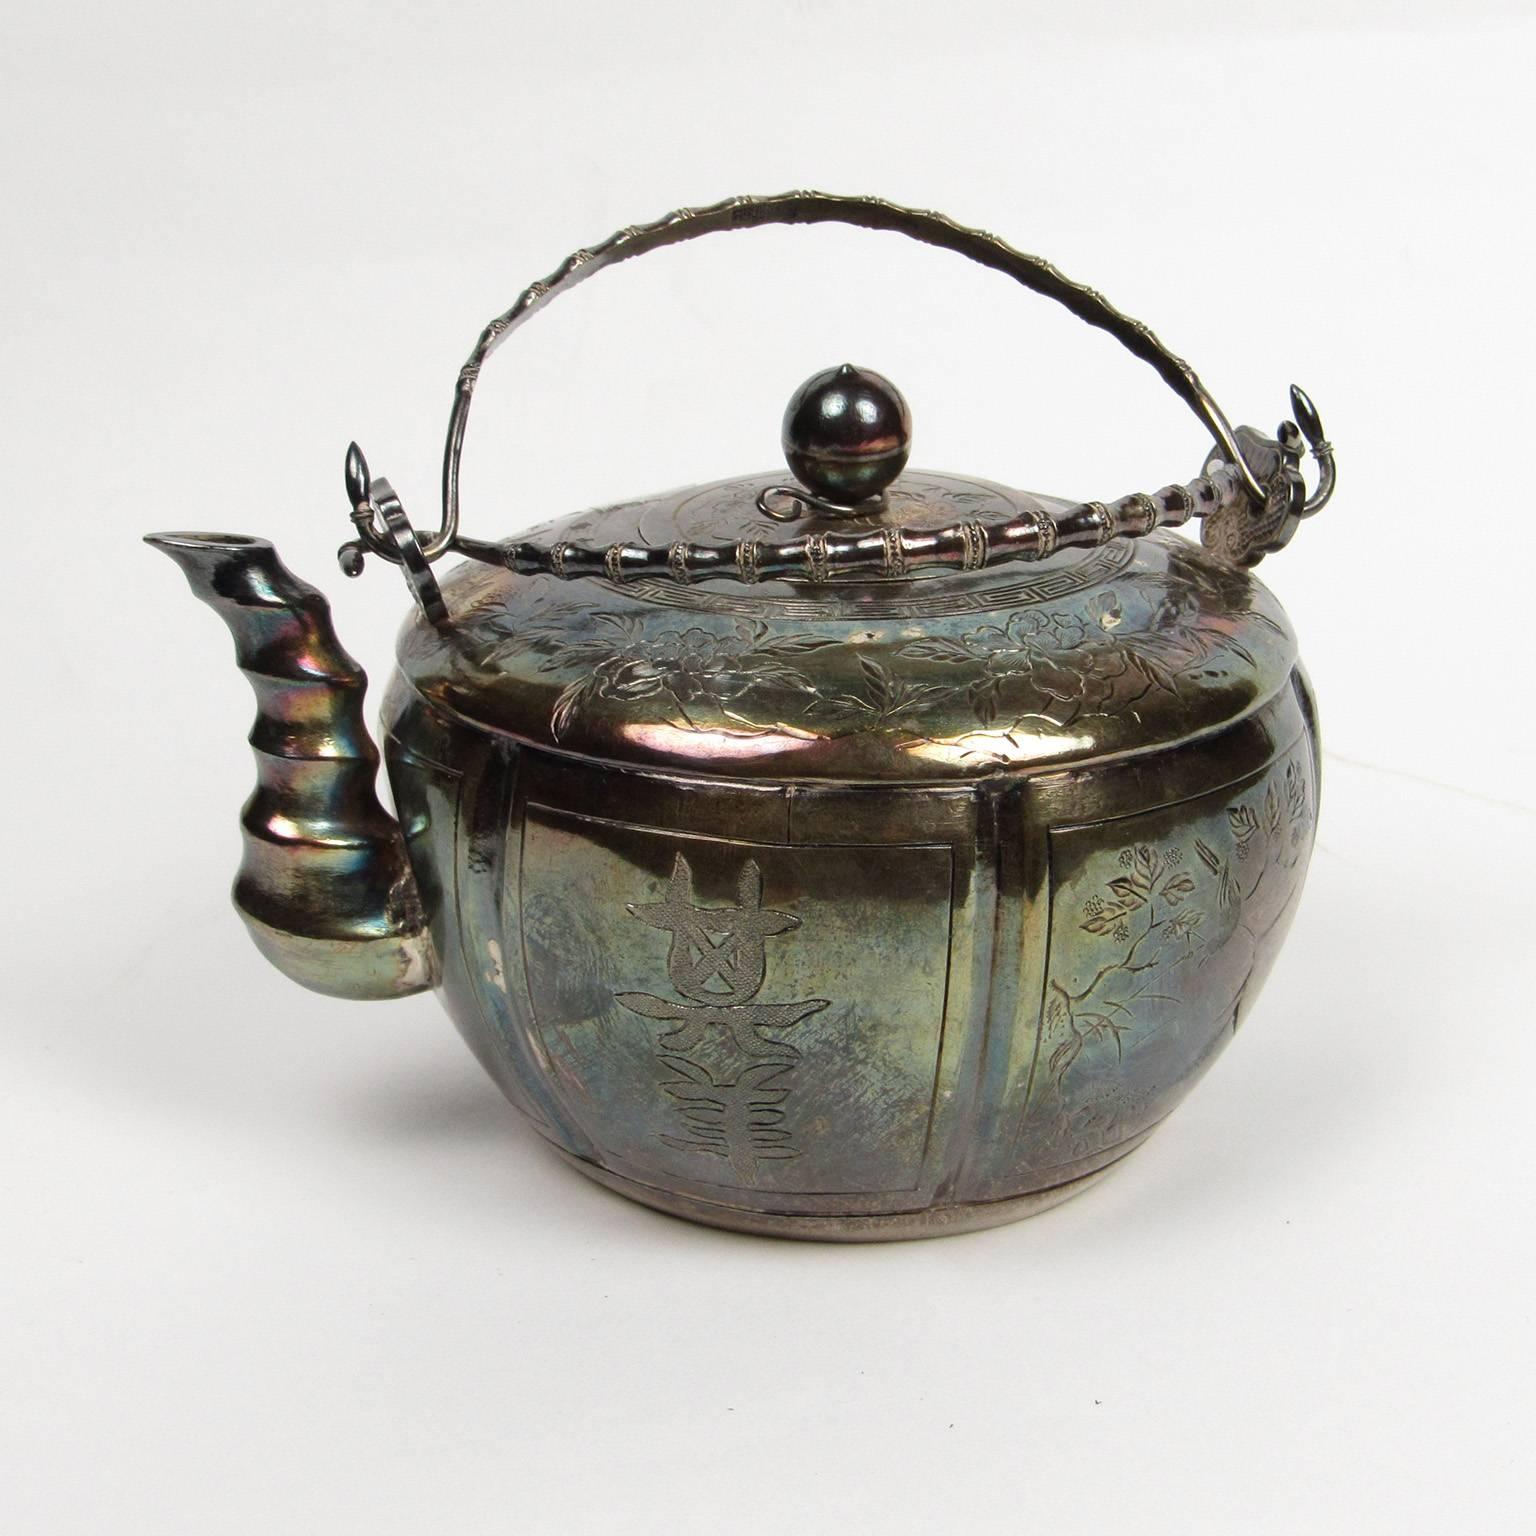 Signed Japanese silver calligraphic teapot, with three calligraphic panels and etched floral and bird design. Faux bamboo handles and spout, signed on bottom. Excellent provenance available to buyer.
Dimensions: 4 x 5 1/2 x 4 inches.